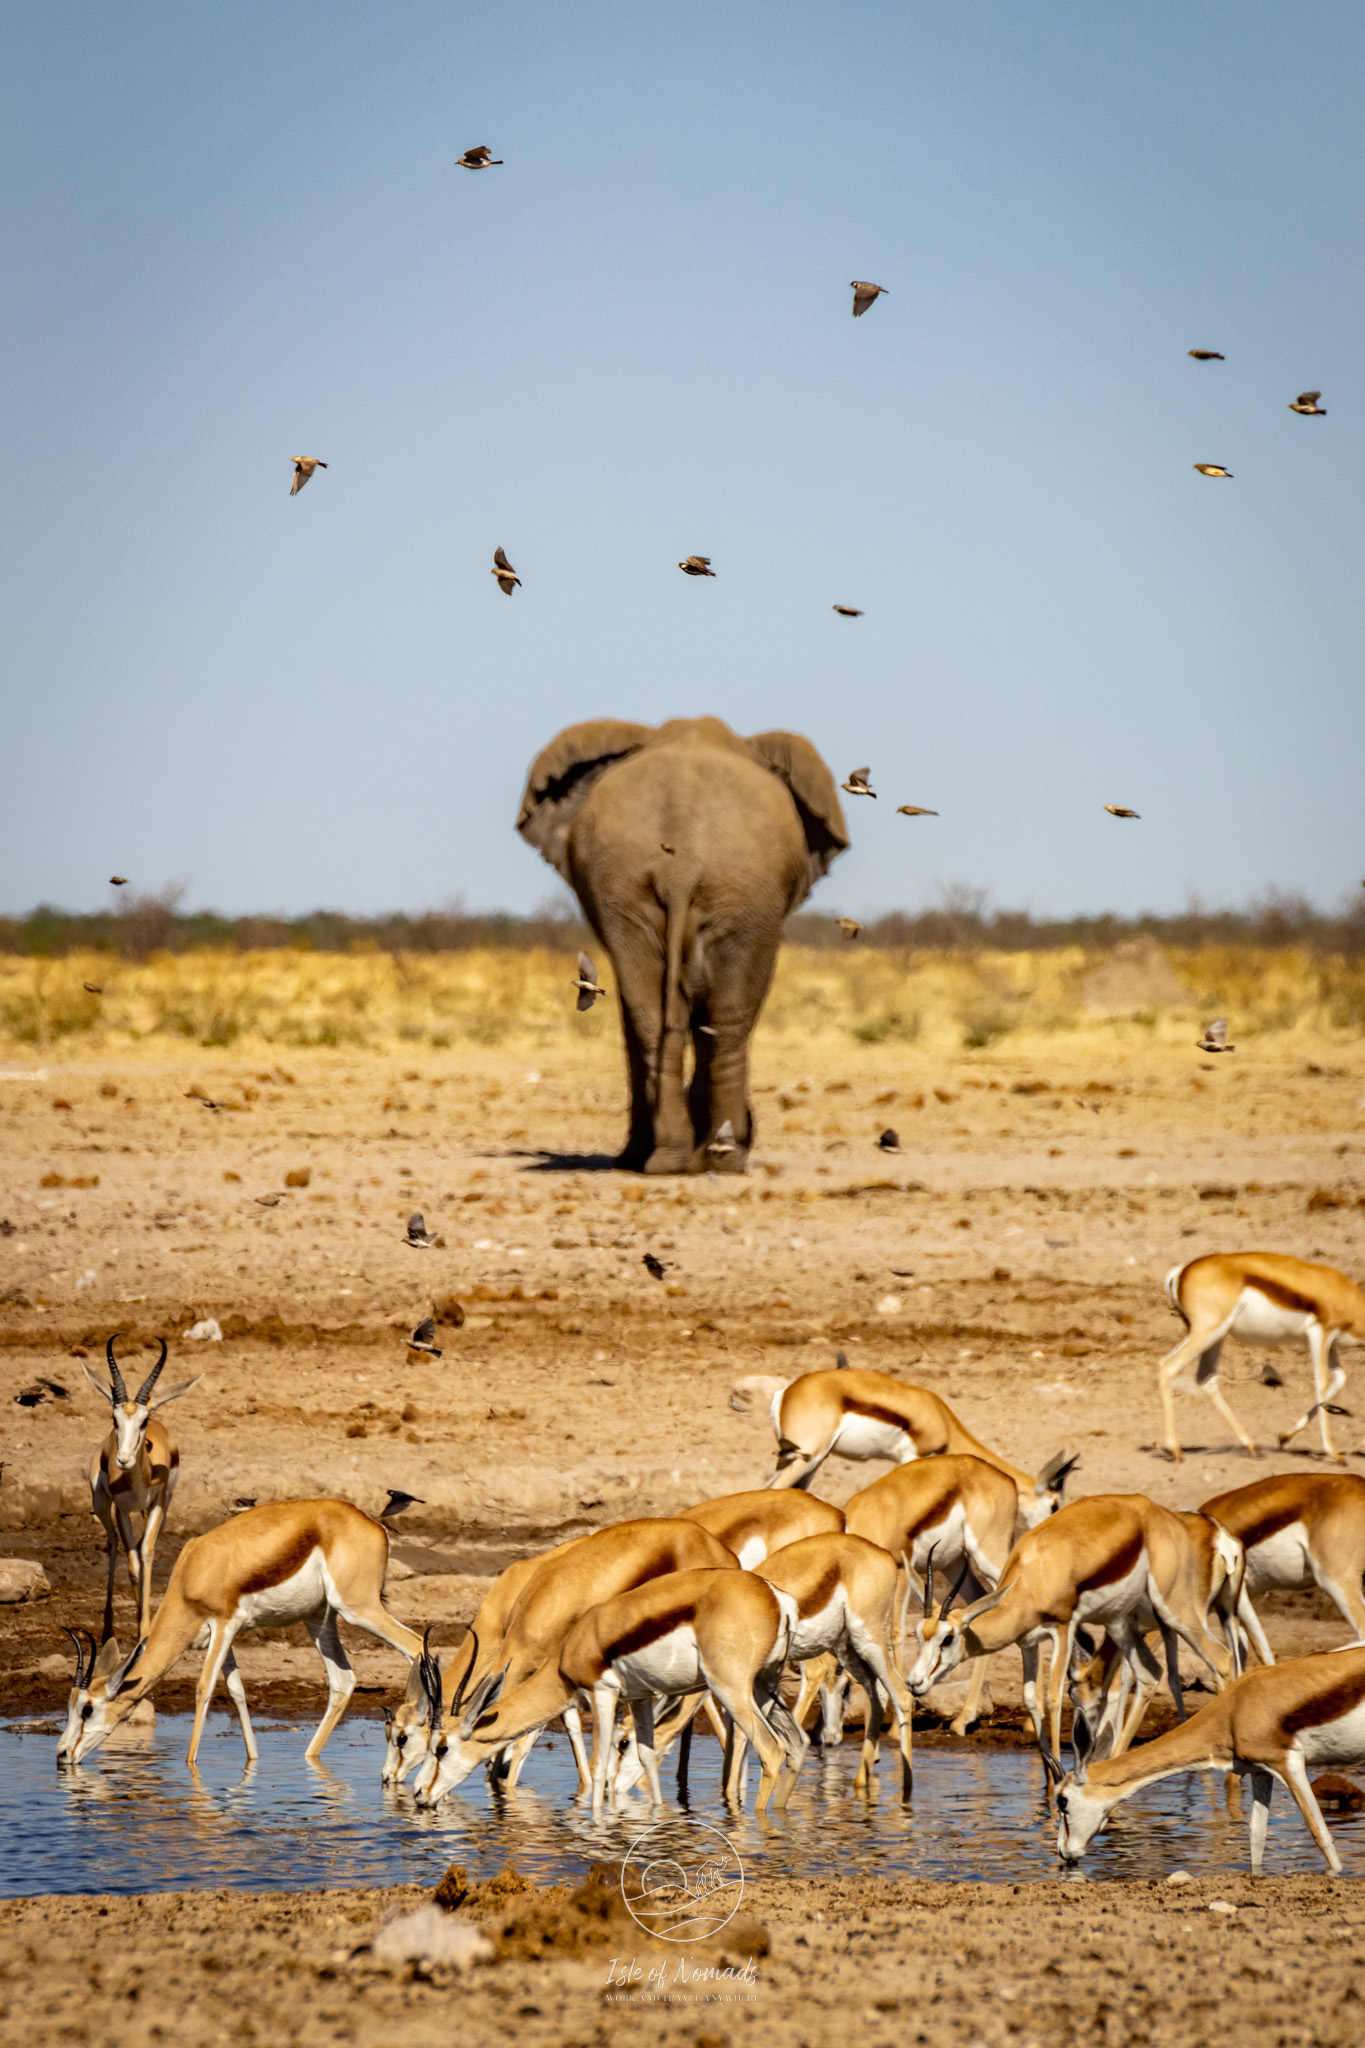 ...as it is quite dry and the animals congregate at the water holes